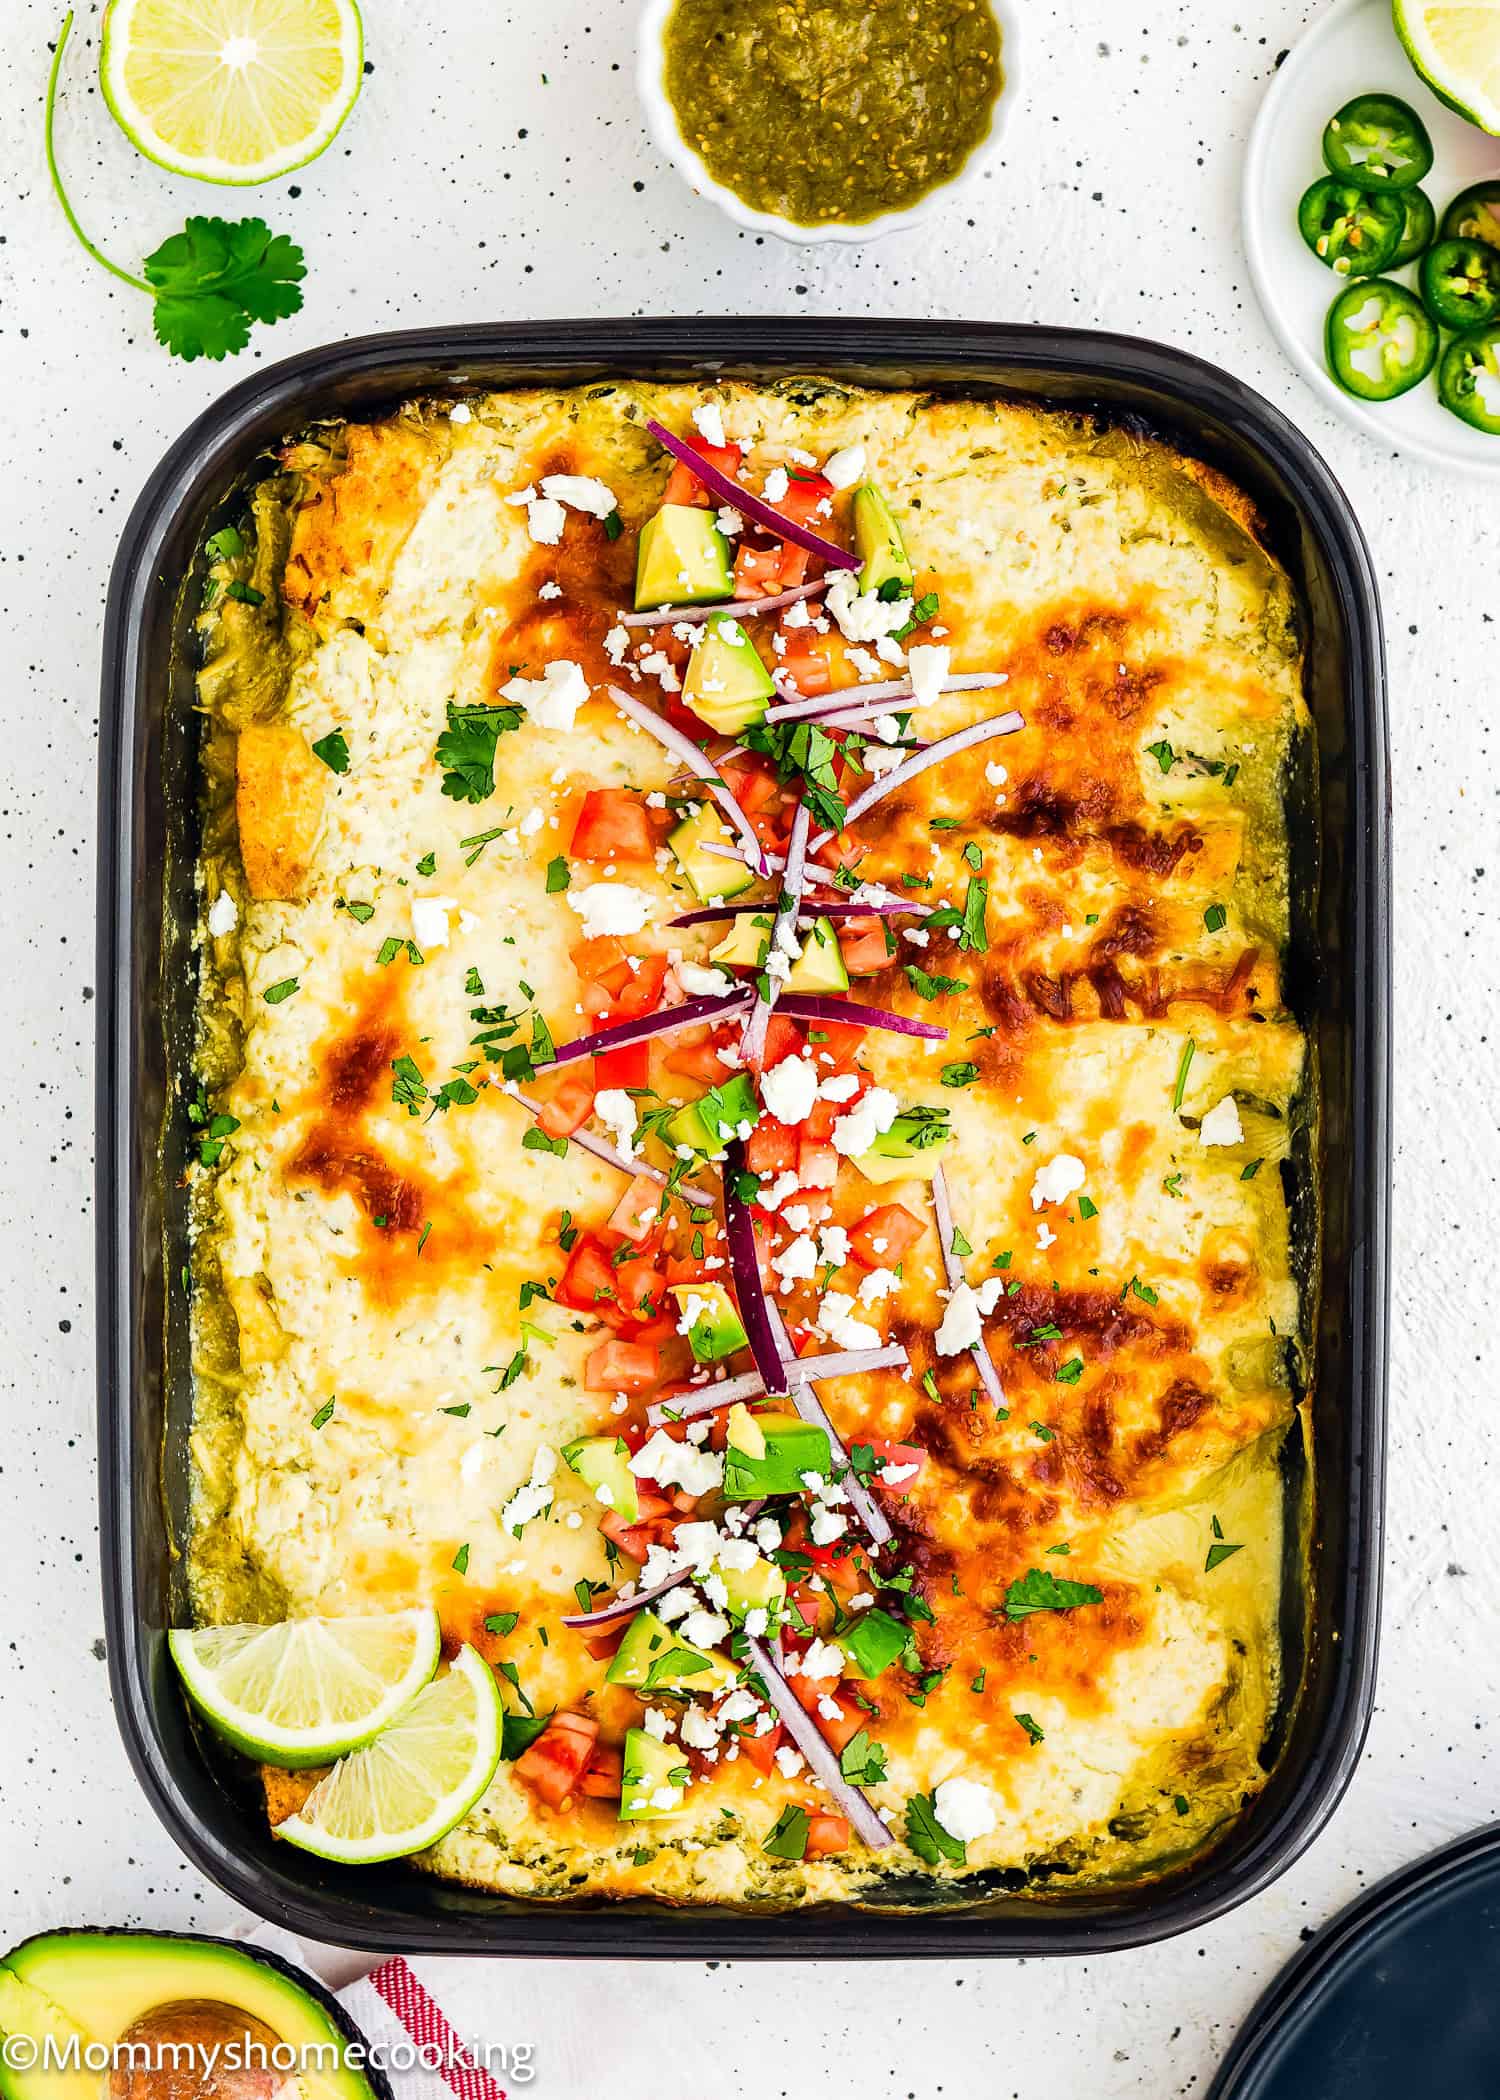 Quick and Easy Enchiladas Suizas with topping in a black casserole dish over a white surface.